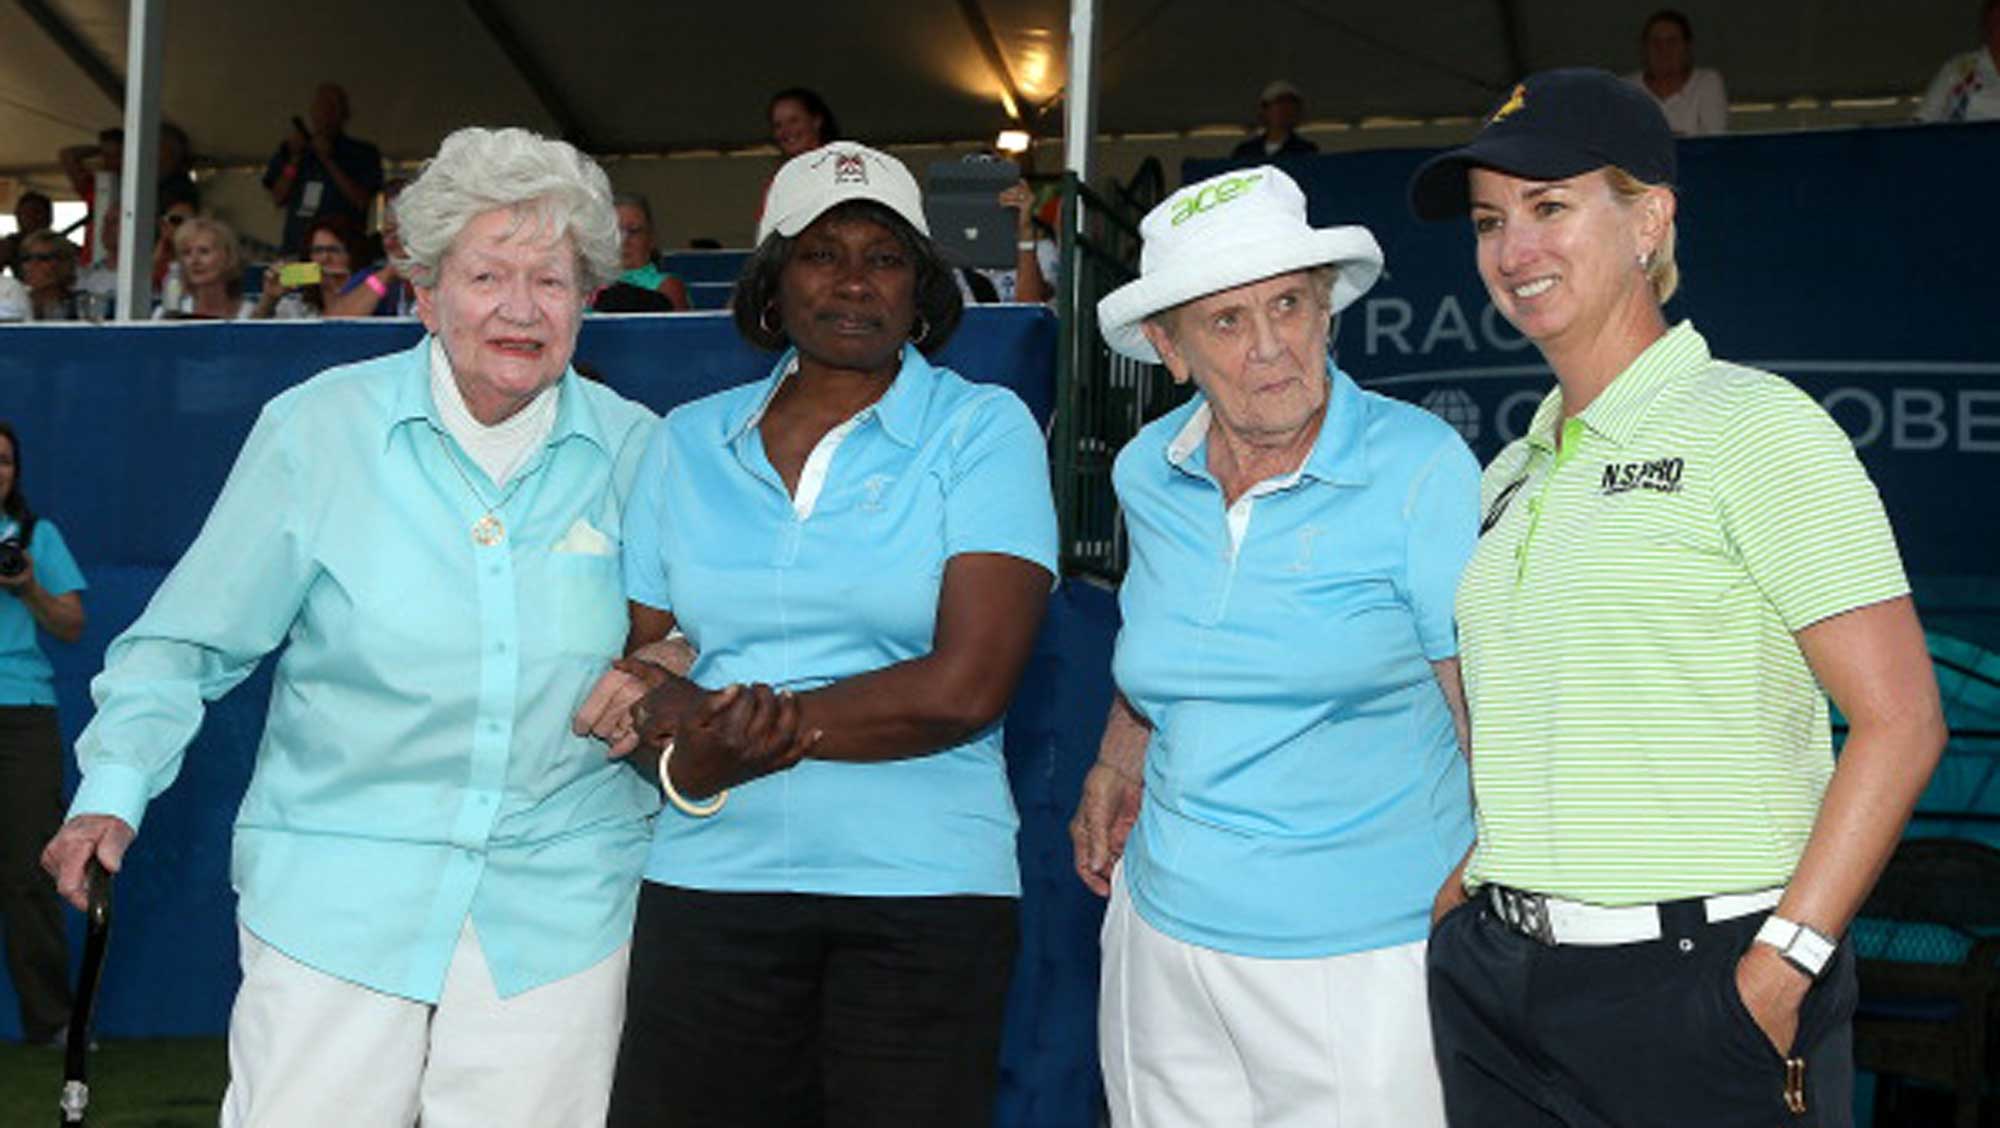 2020 The Volvik Founders Cup Revitalized the LPGA by Celebrating the